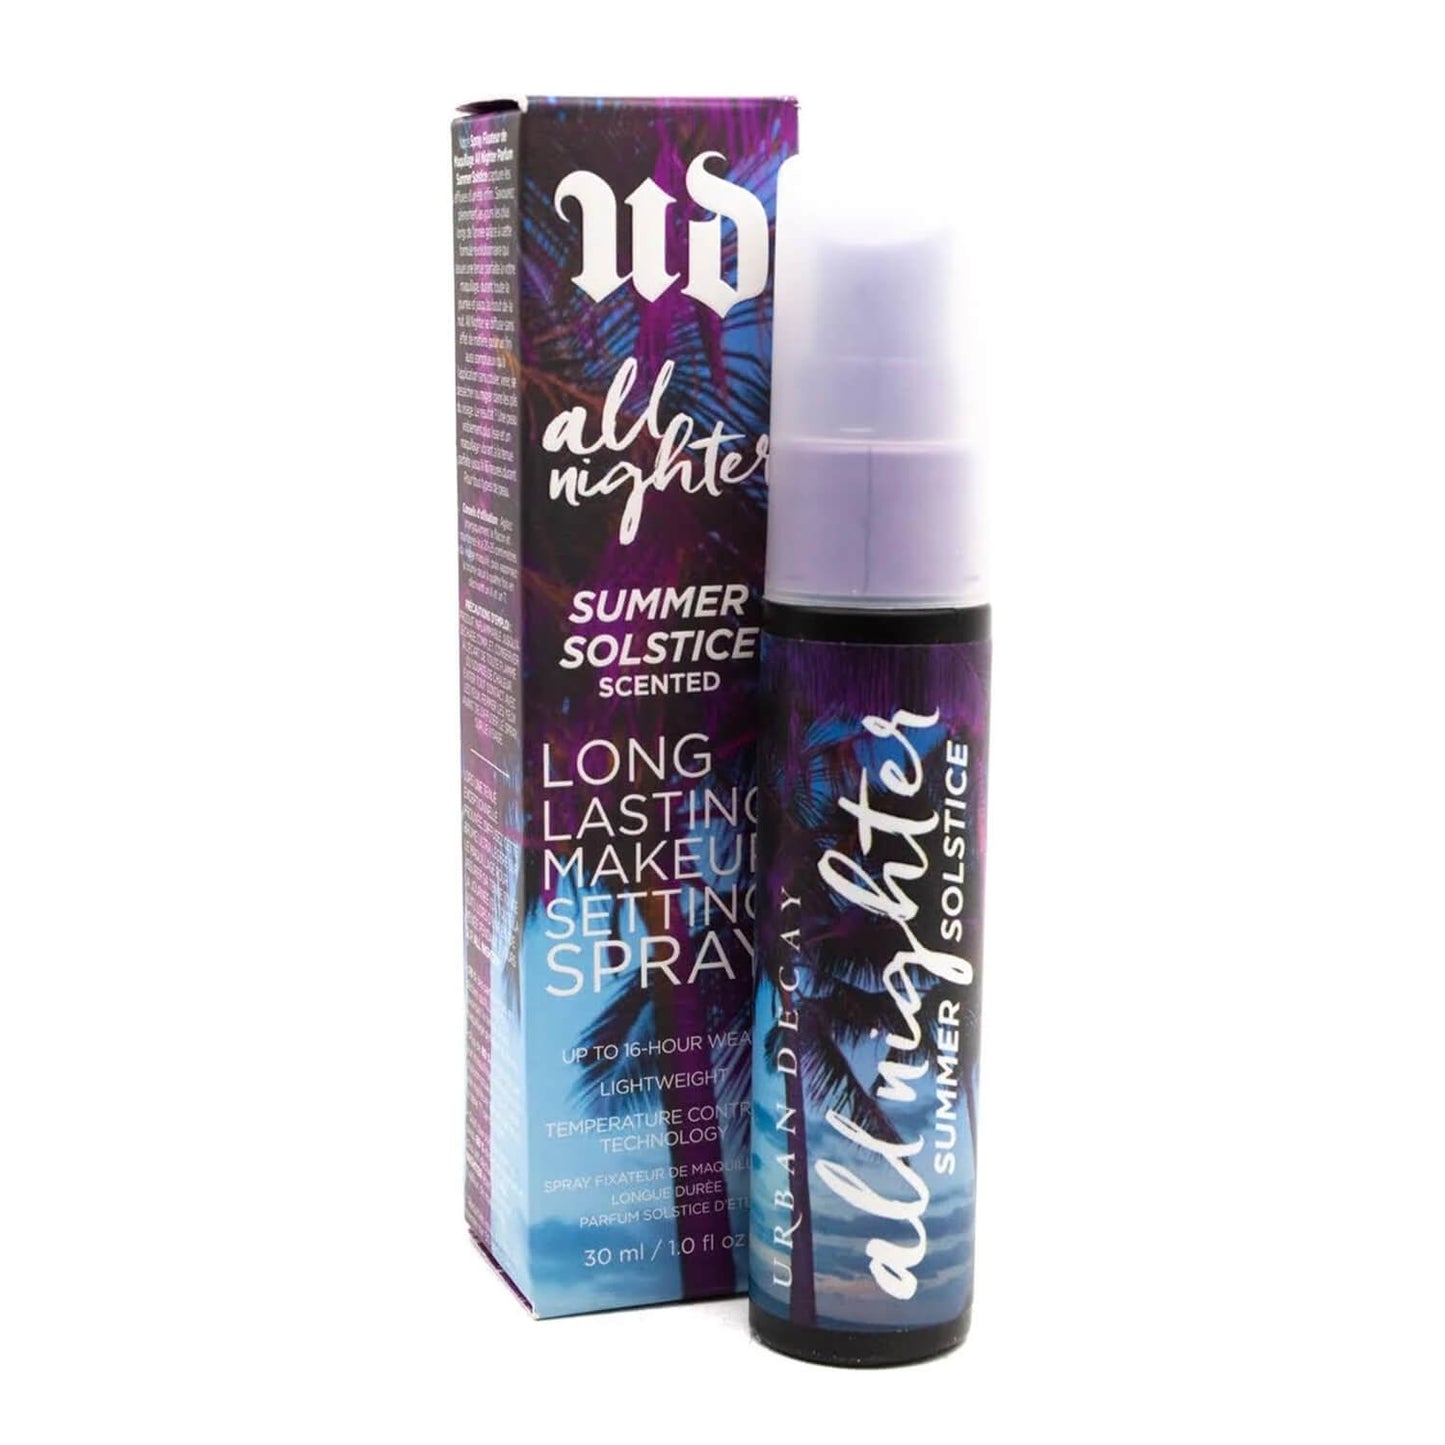 Buy Urban Decay All Nighter Summer Solstice Scented Makeup Setting Spray available at Heygirl.pk for cash on delivery in Pakistan